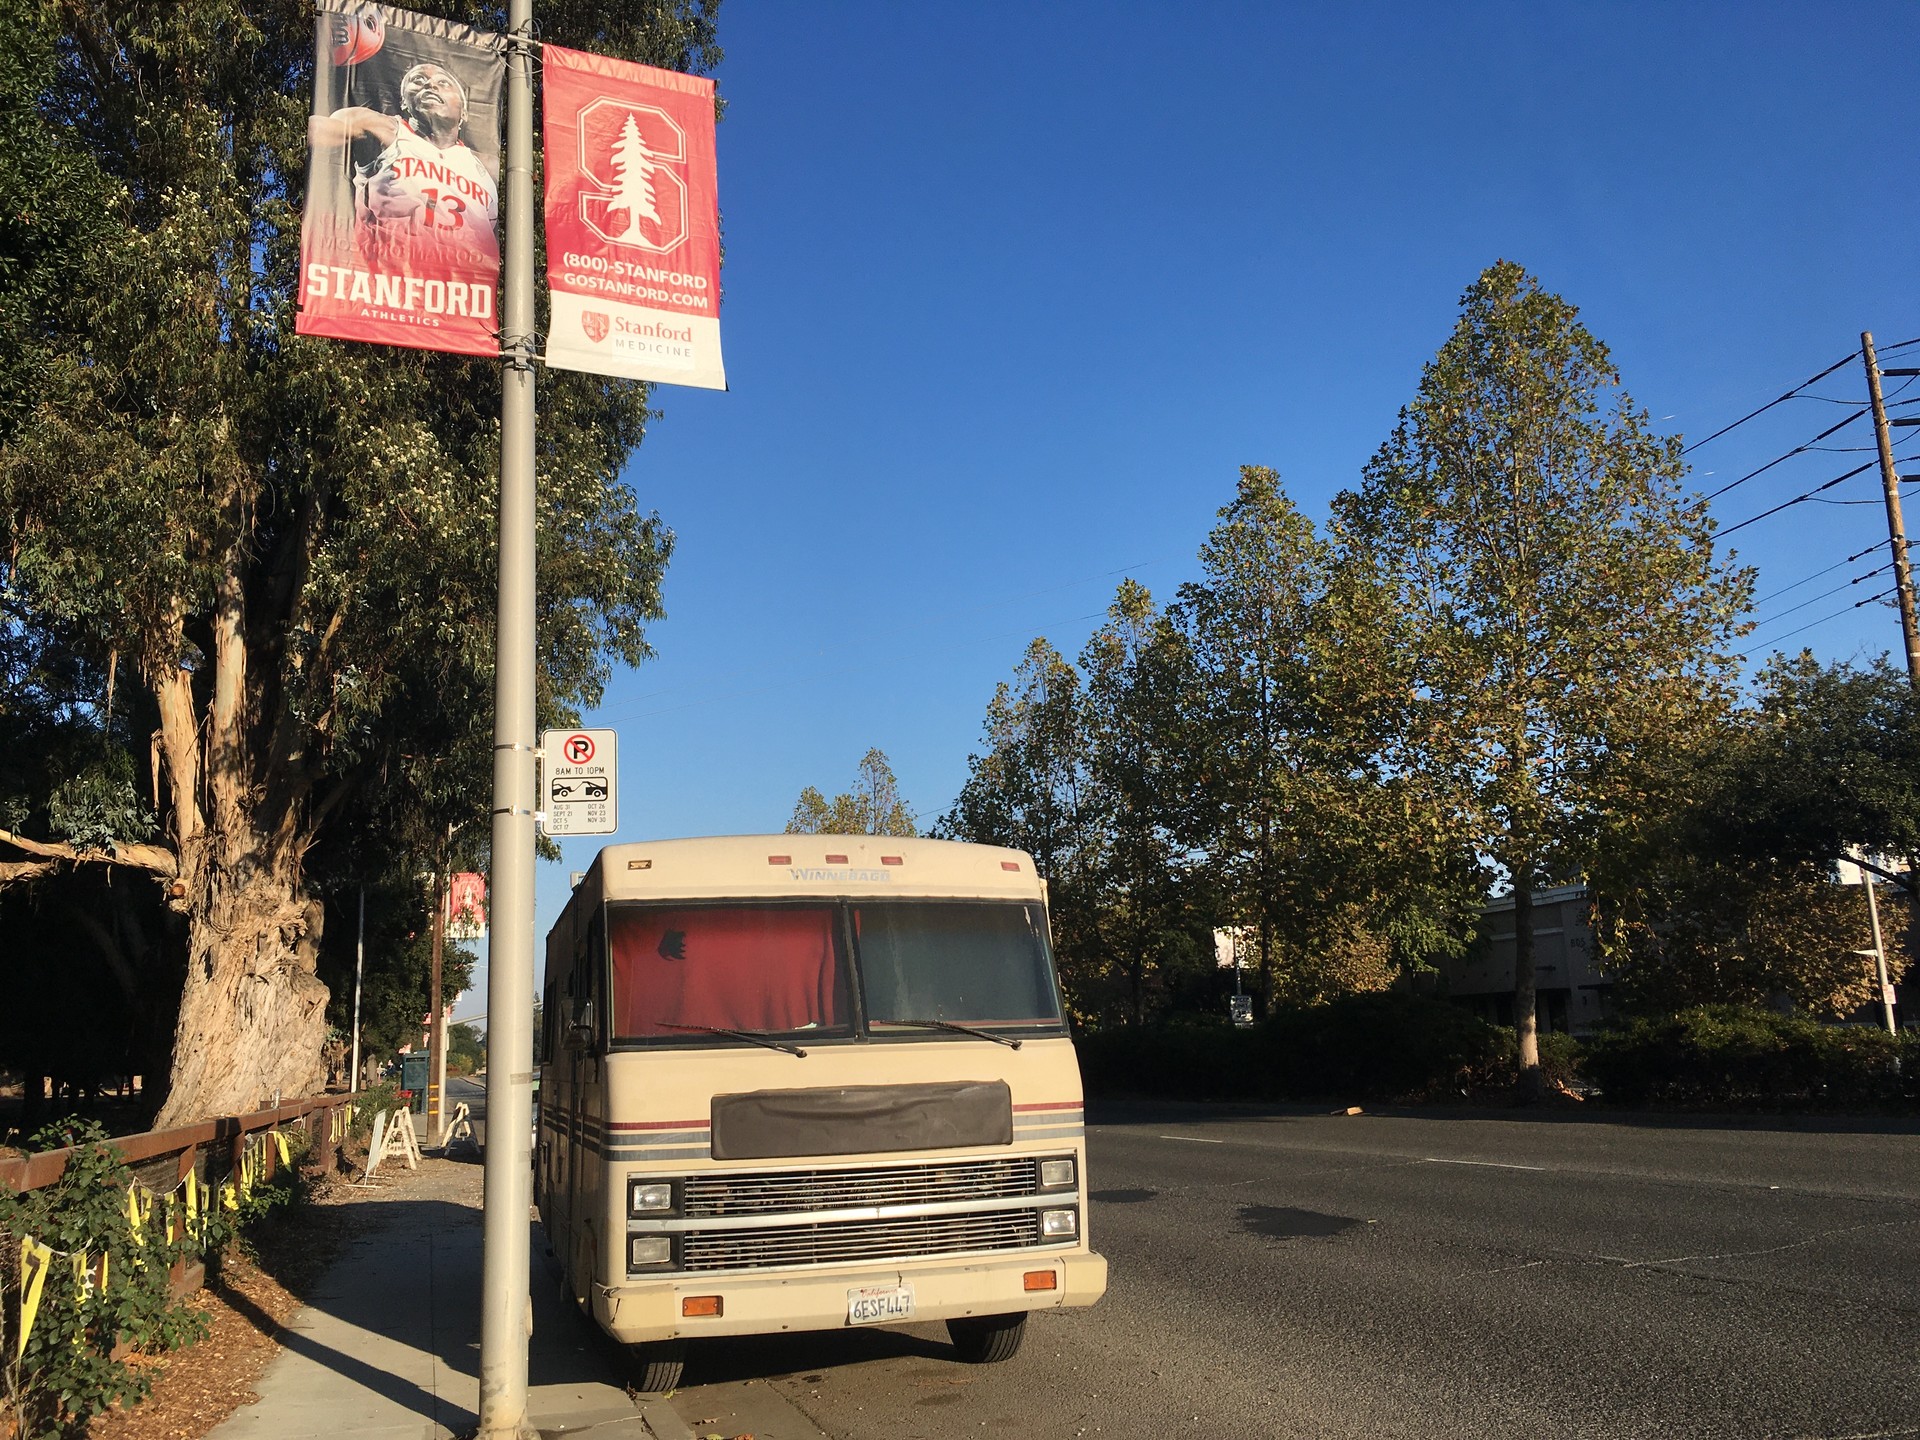 El Camino Real, on the border of the Stanford University campus, has been home for years to an ever shifting collection of RVs where construction workers and local homeless people live — a reflection of the local housing crisis.